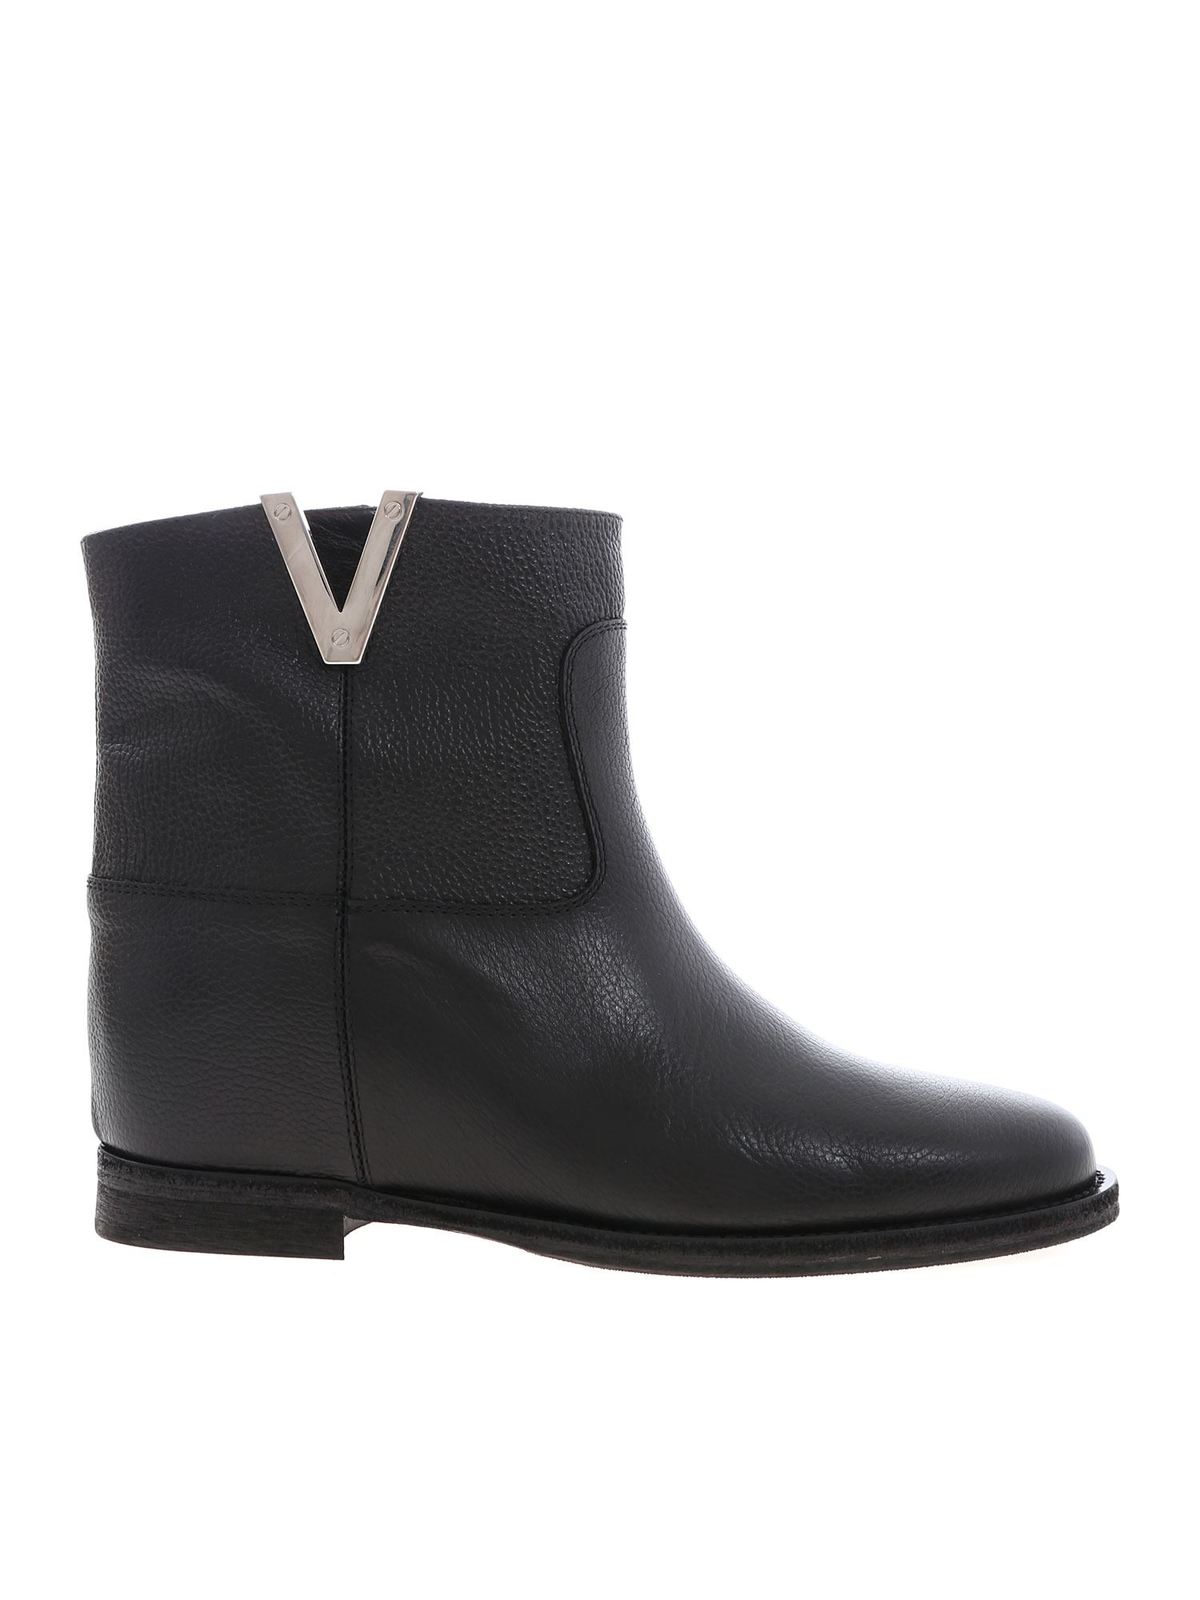 boots Via Roma 15 V ankle boots in black hammered 2576NERO